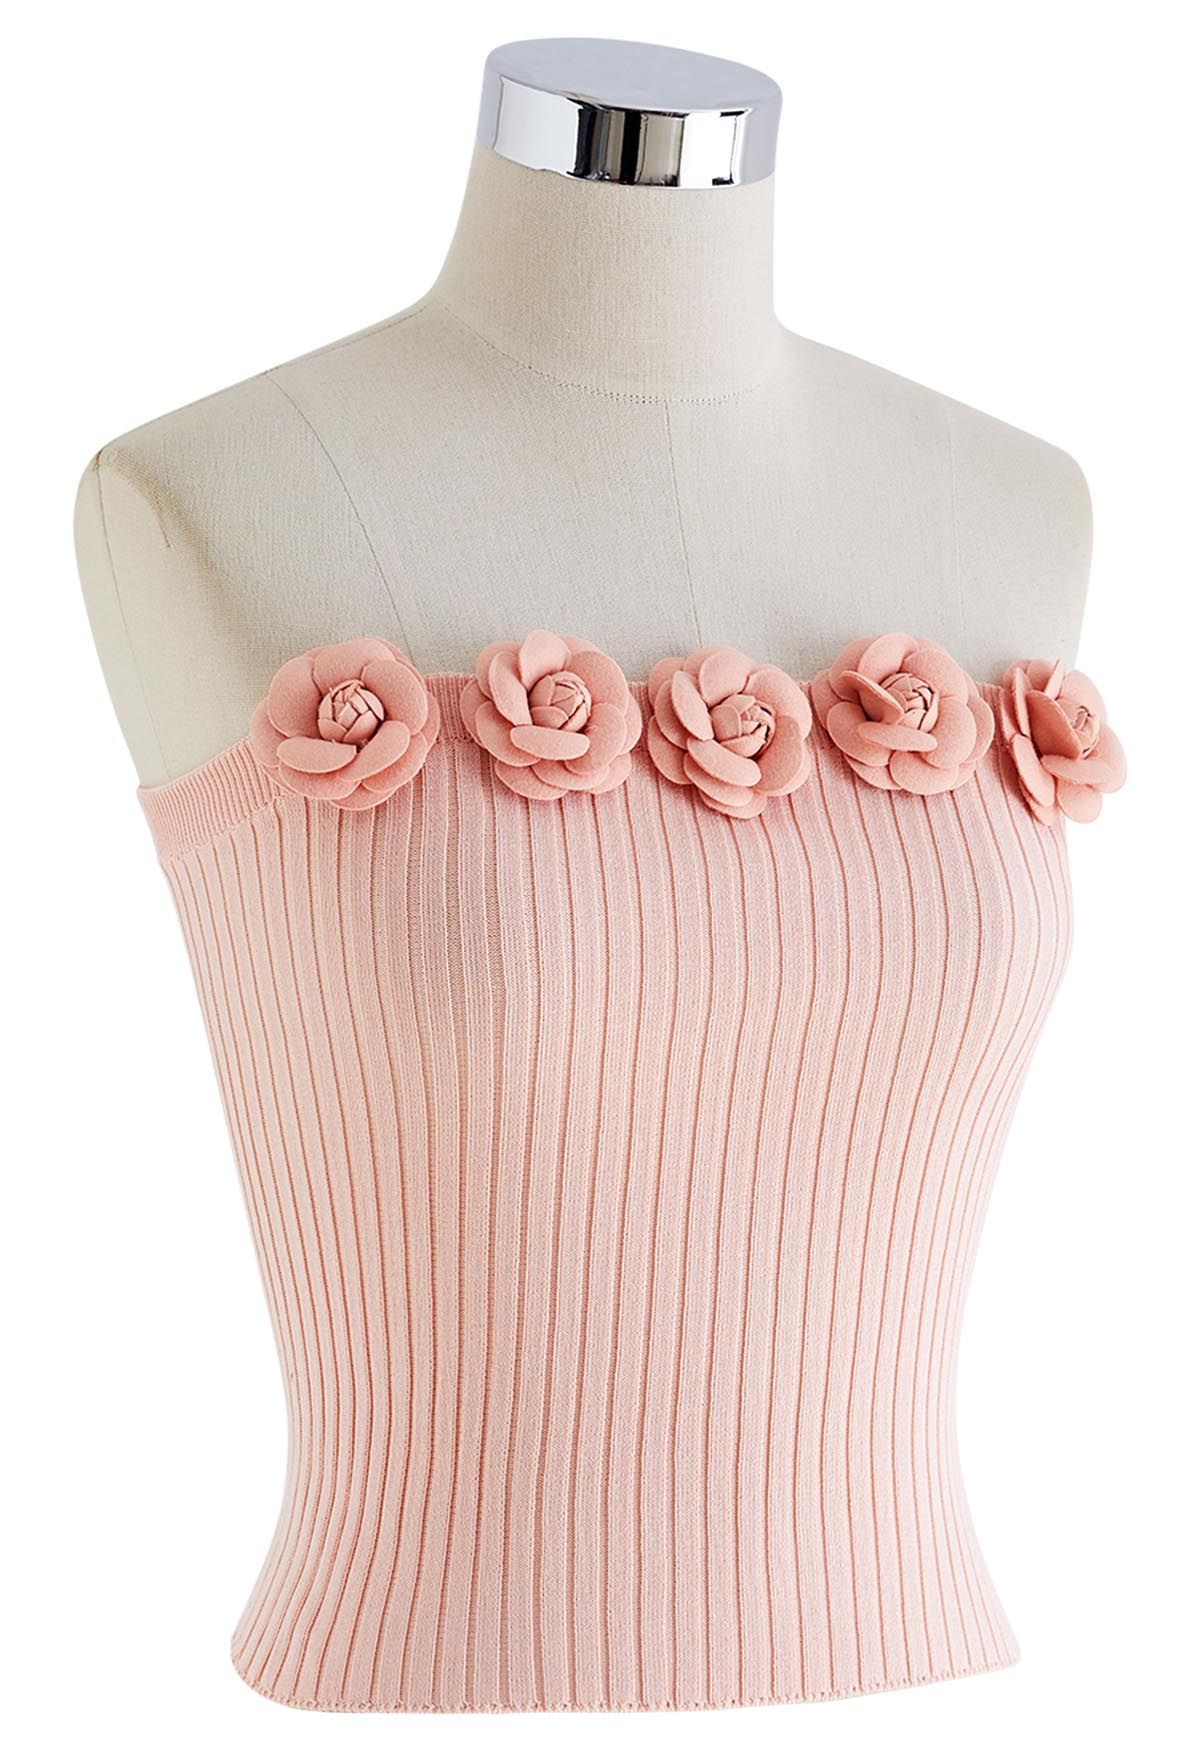 3D Floral Stretchy Tube Top in Peach